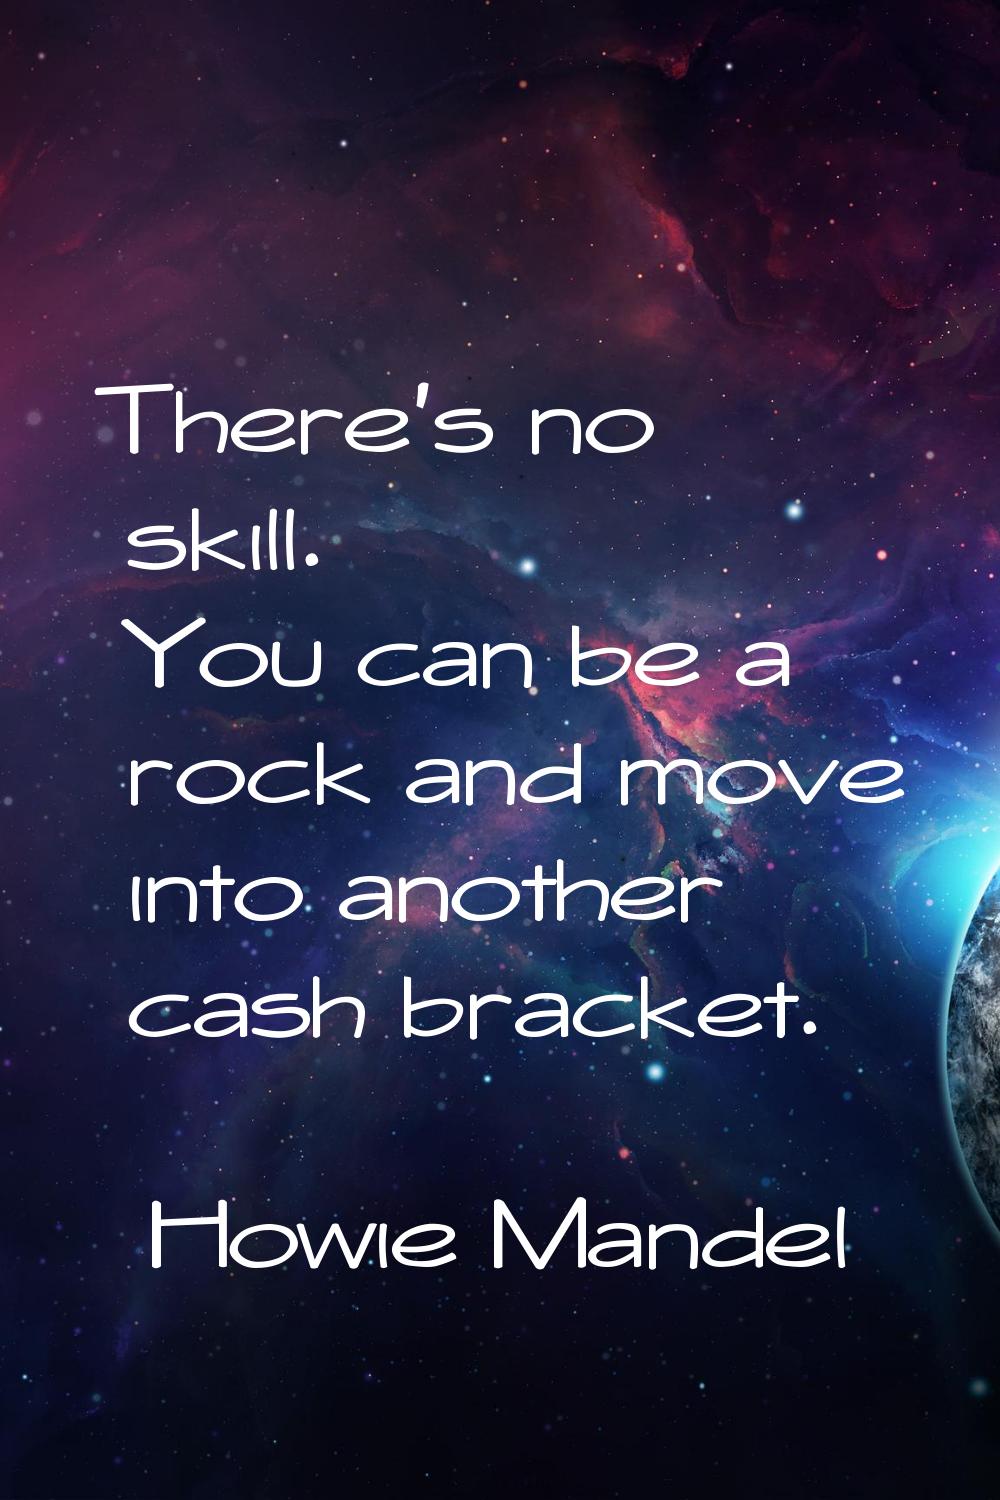 There's no skill. You can be a rock and move into another cash bracket.